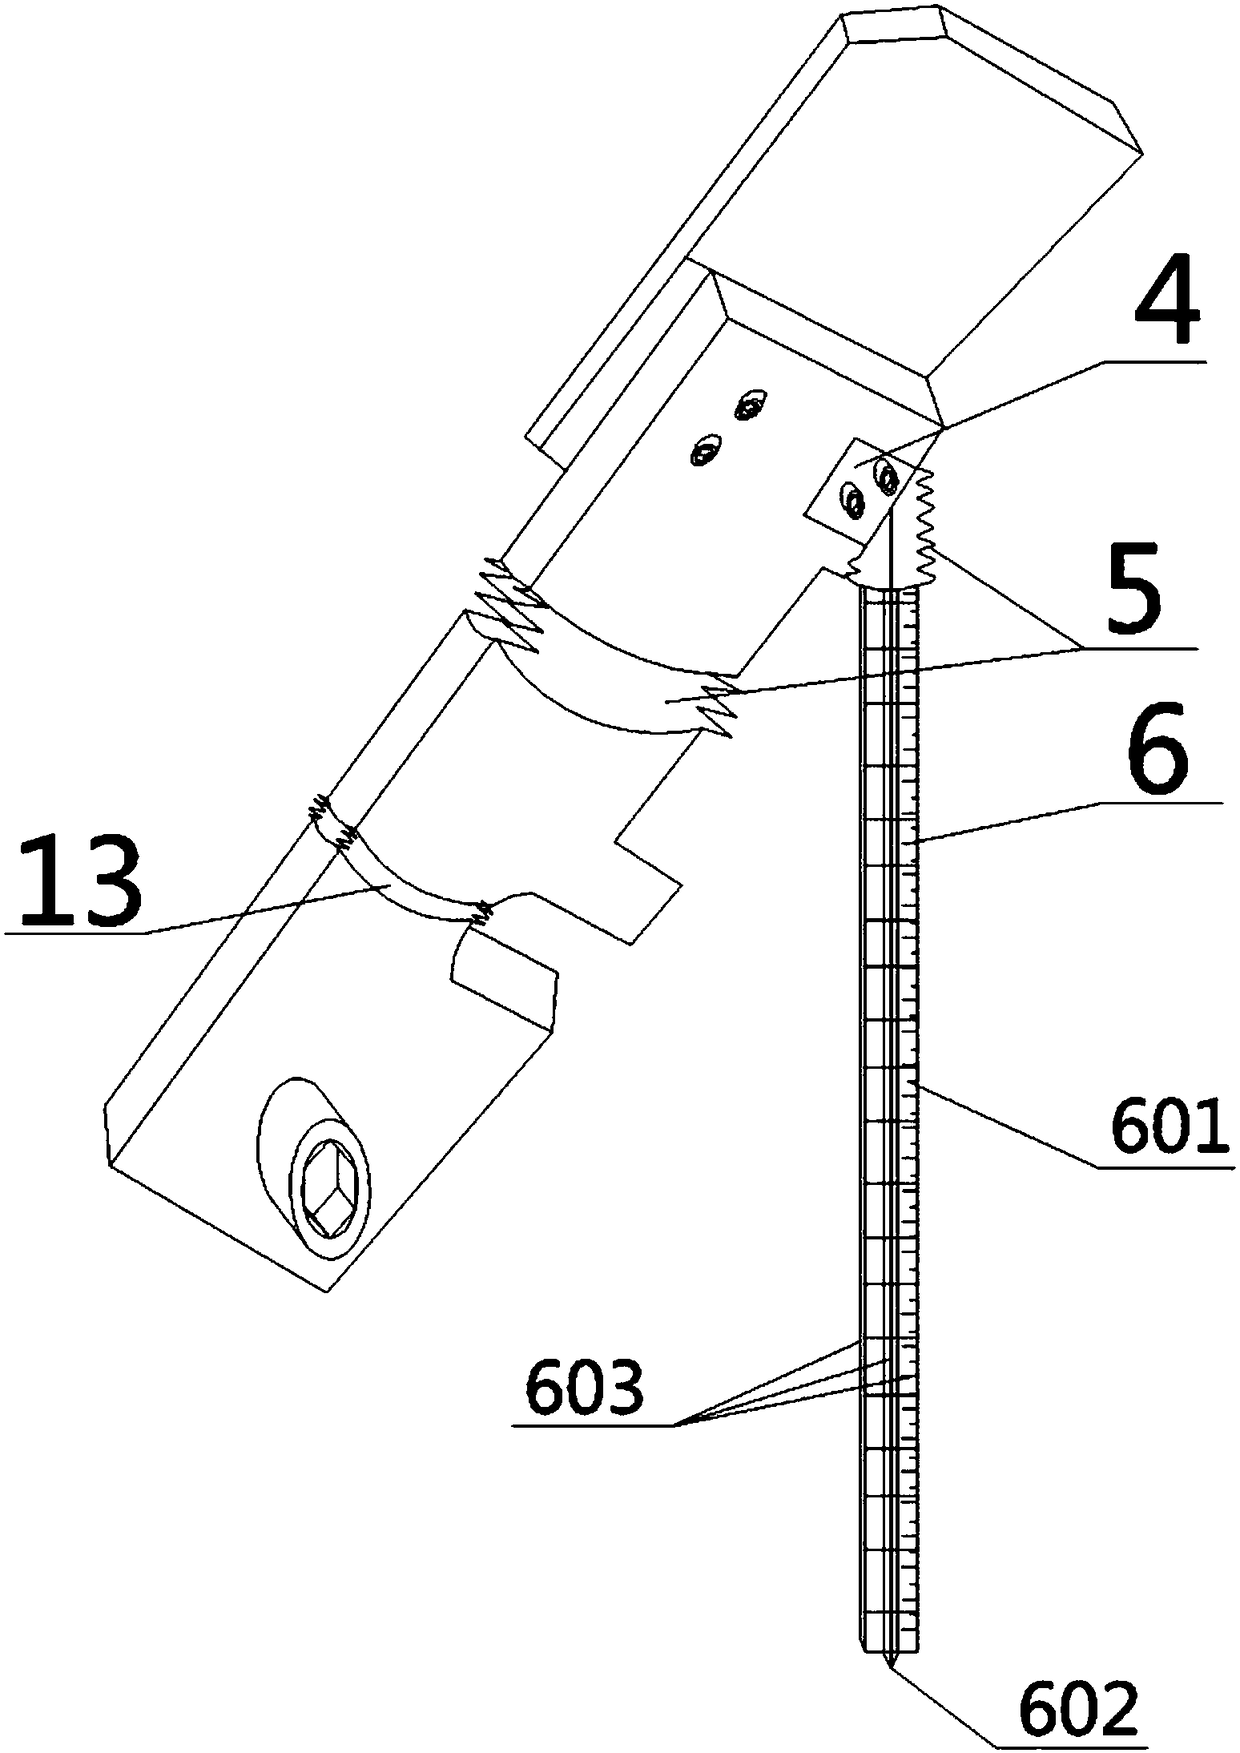 Double-position telescopic positioning mechanism for automobile inspection tool